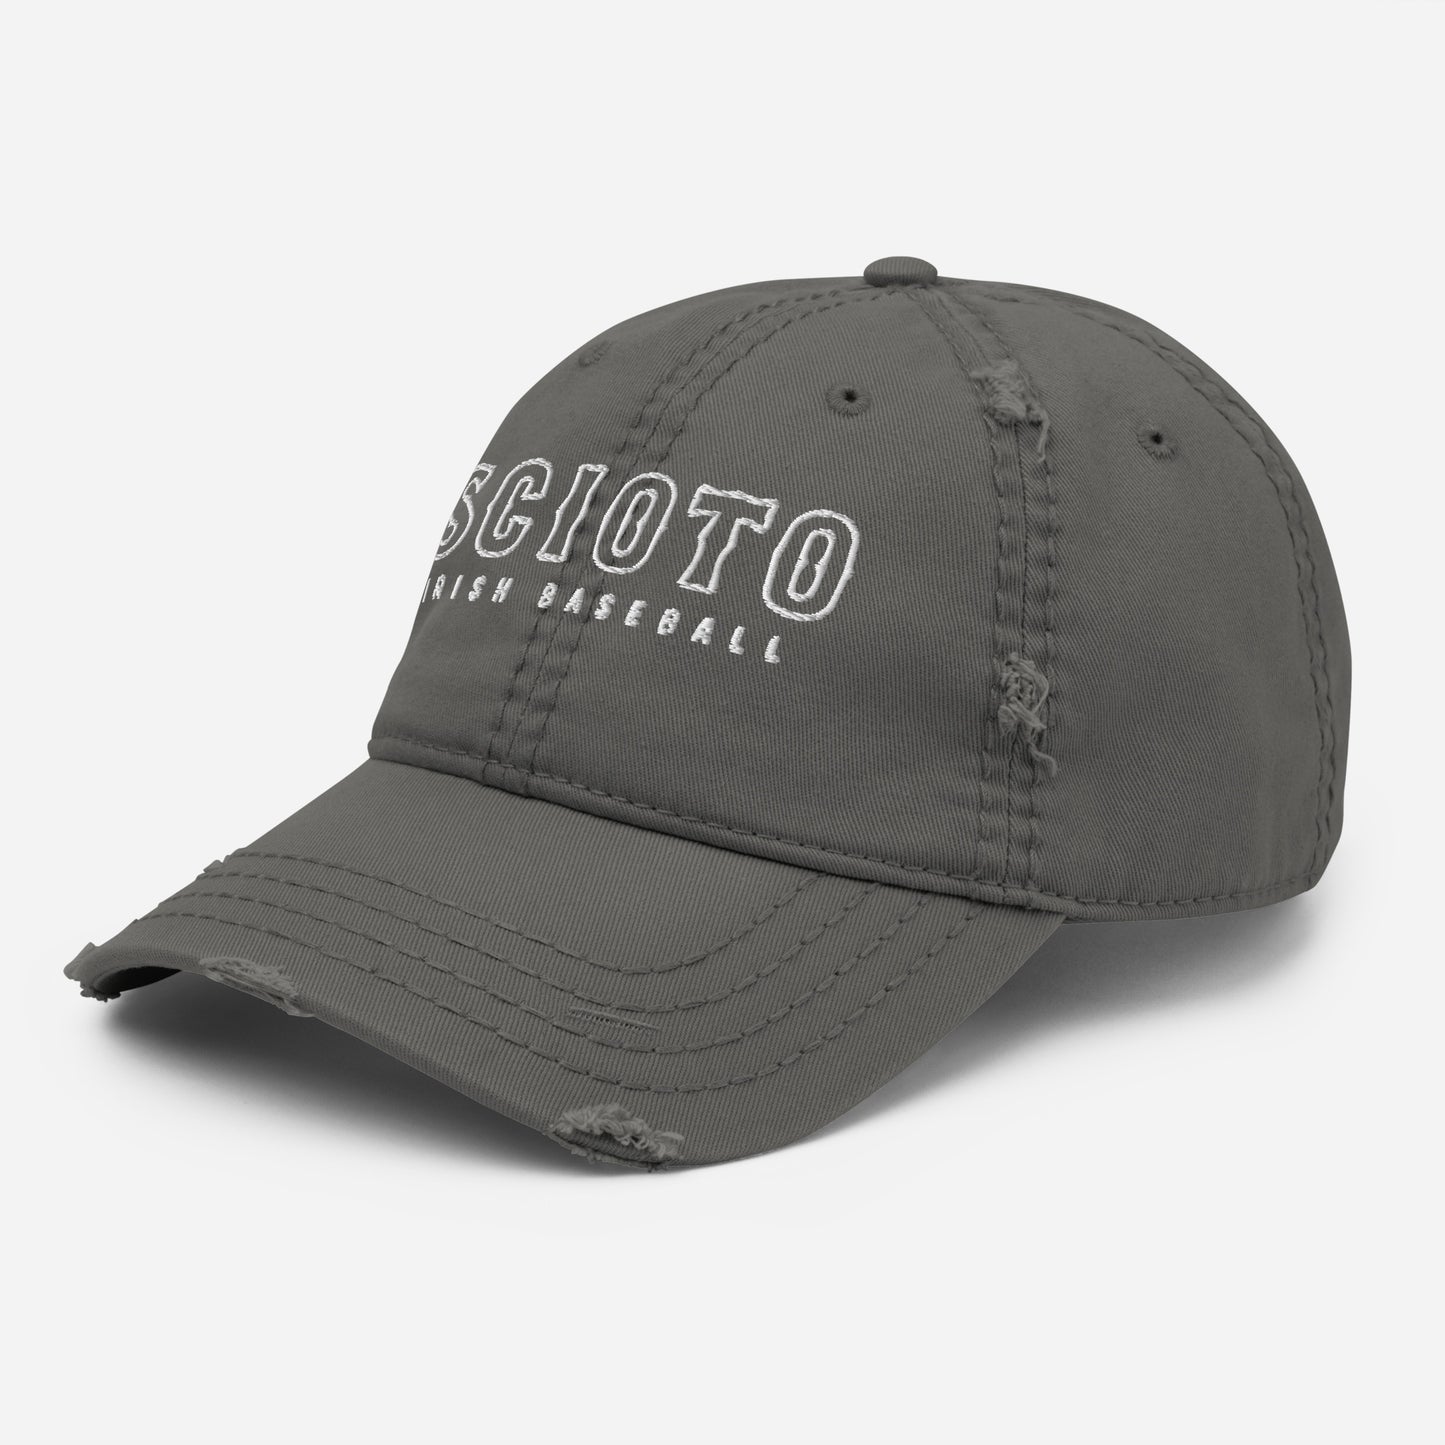 SCIOTO BASEBALL_Embroidered-Distressed Dad Hat